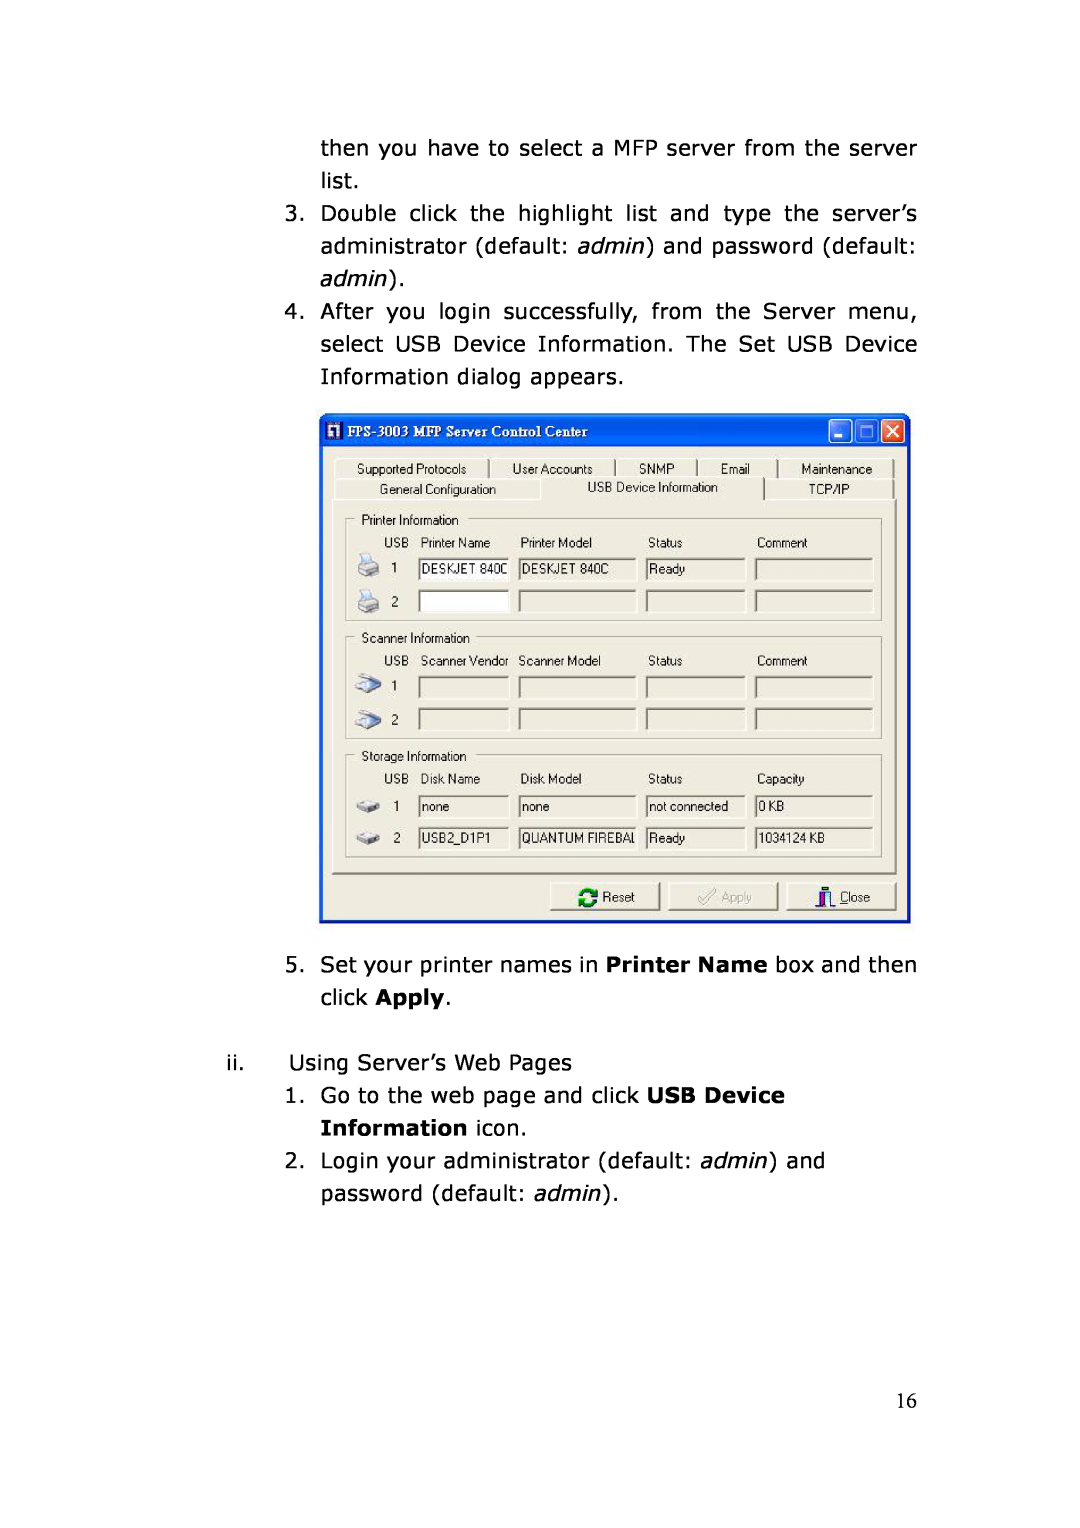 LevelOne FPS-3003 user manual then you have to select a MFP server from the server list, ii. Using Server’s Web Pages 